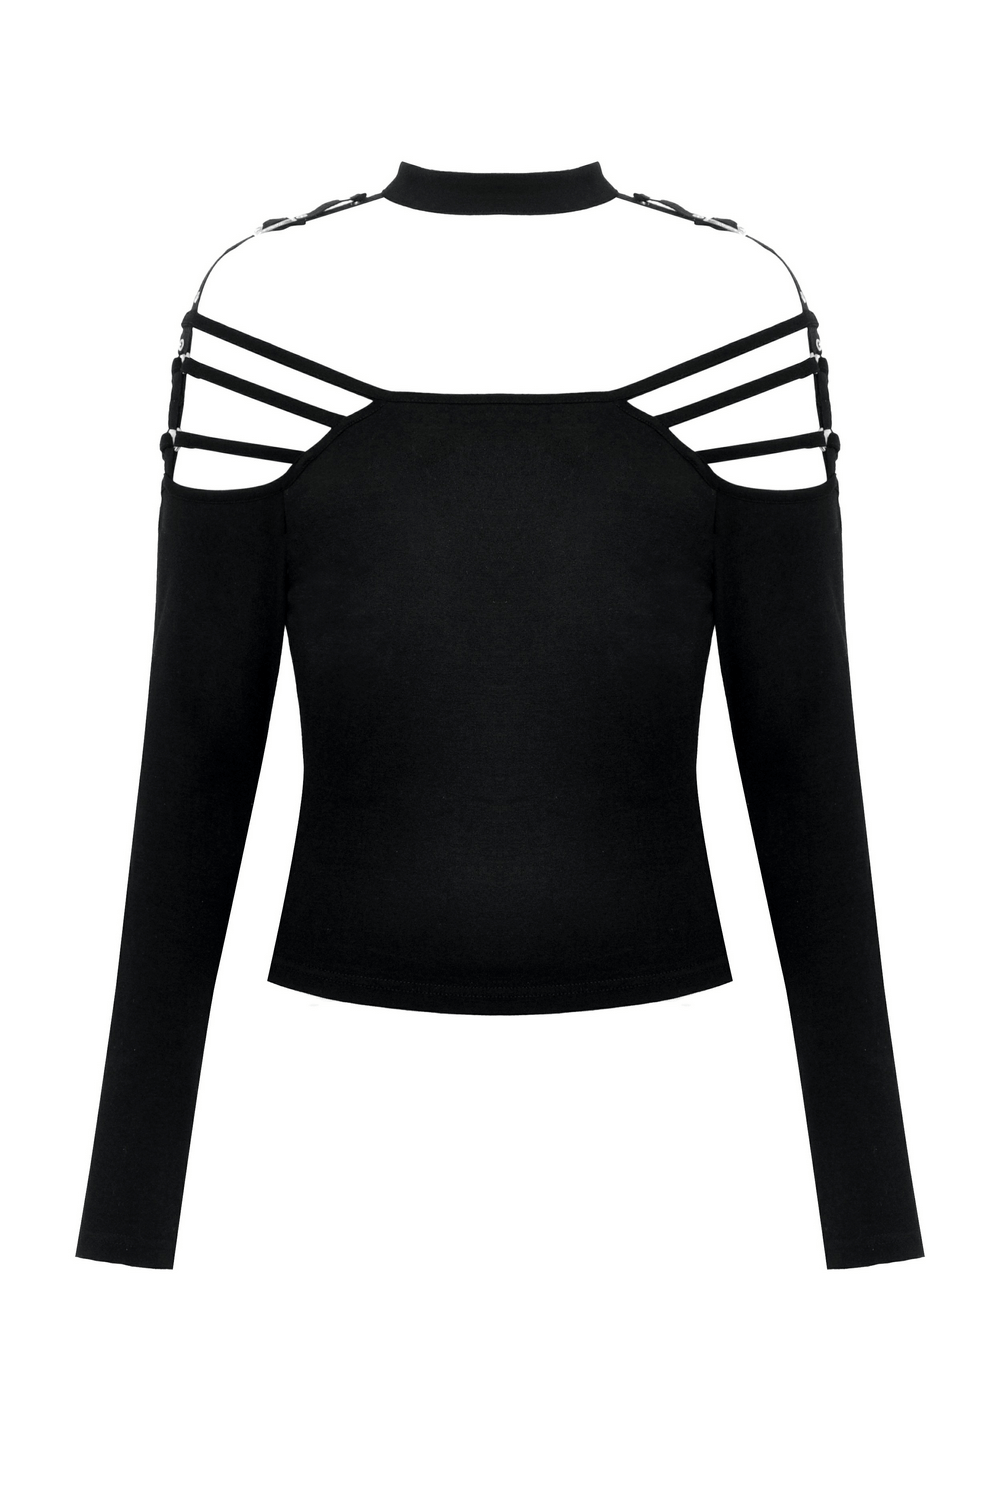 Sexy Gothic Off-Shoulder Top with Long Sleeves